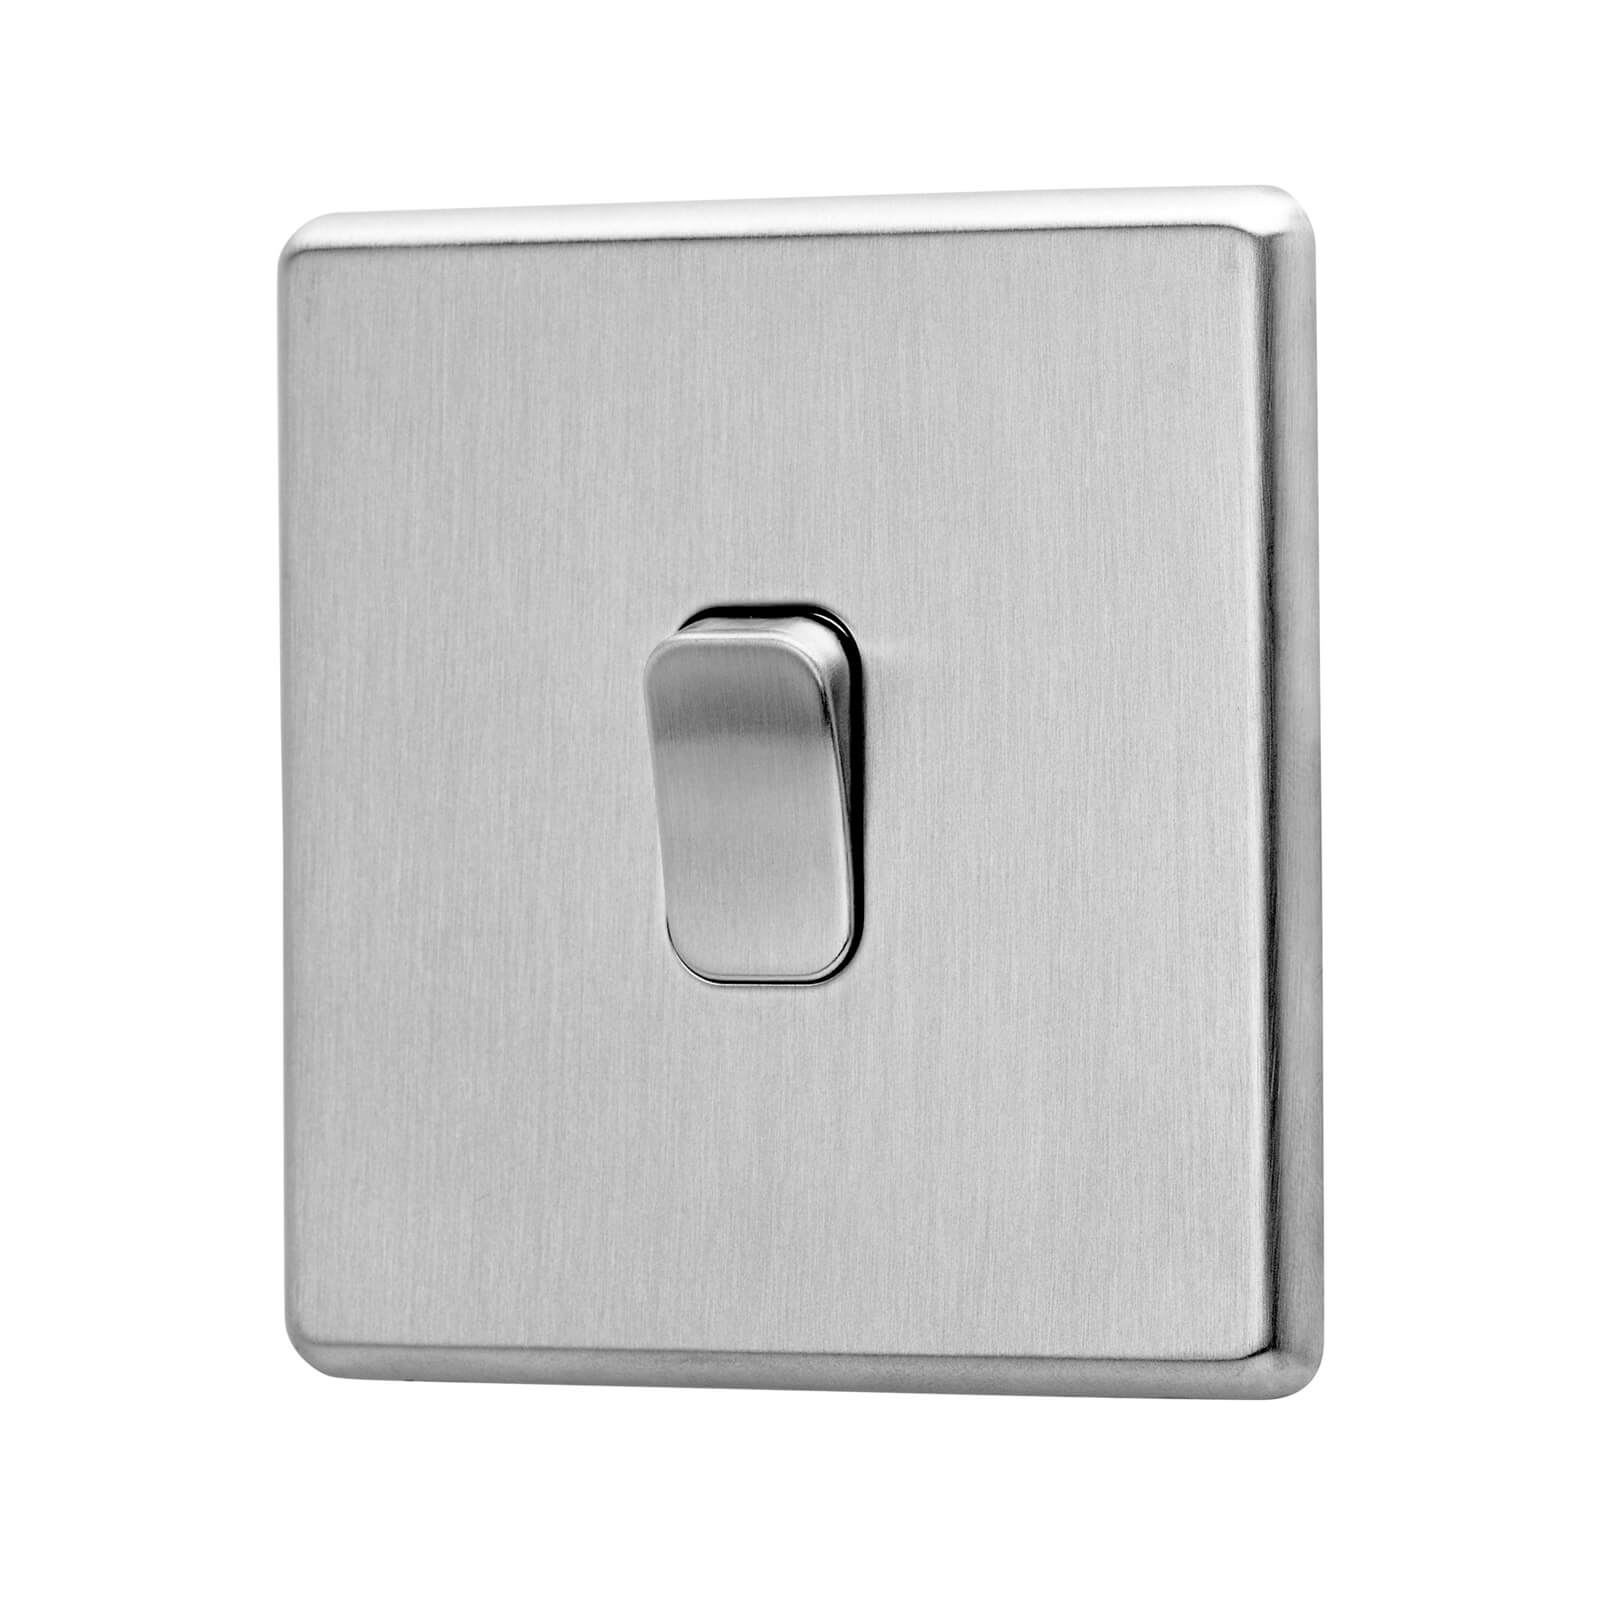 Photo of Arlec Fusion 10a 1gang 2way Stainless Steel Fusion Single Intermediate Switch